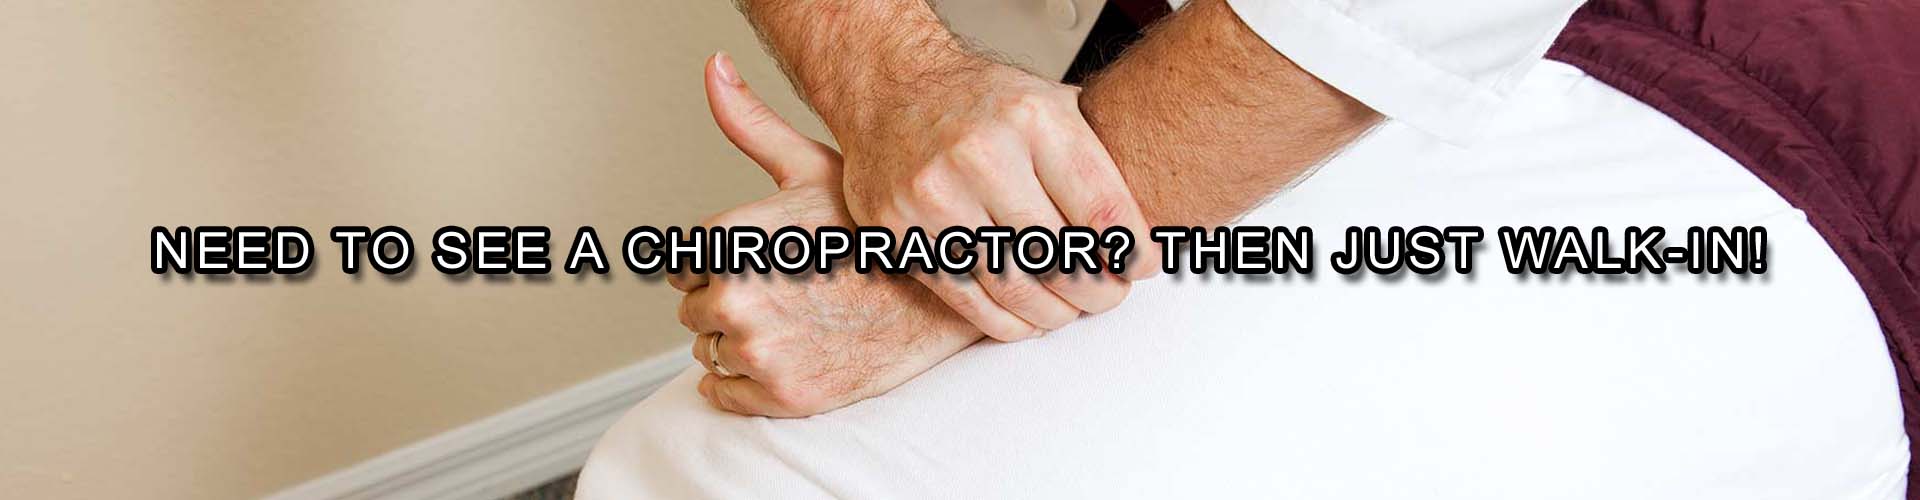 Chiropractic care at RC Walk-In